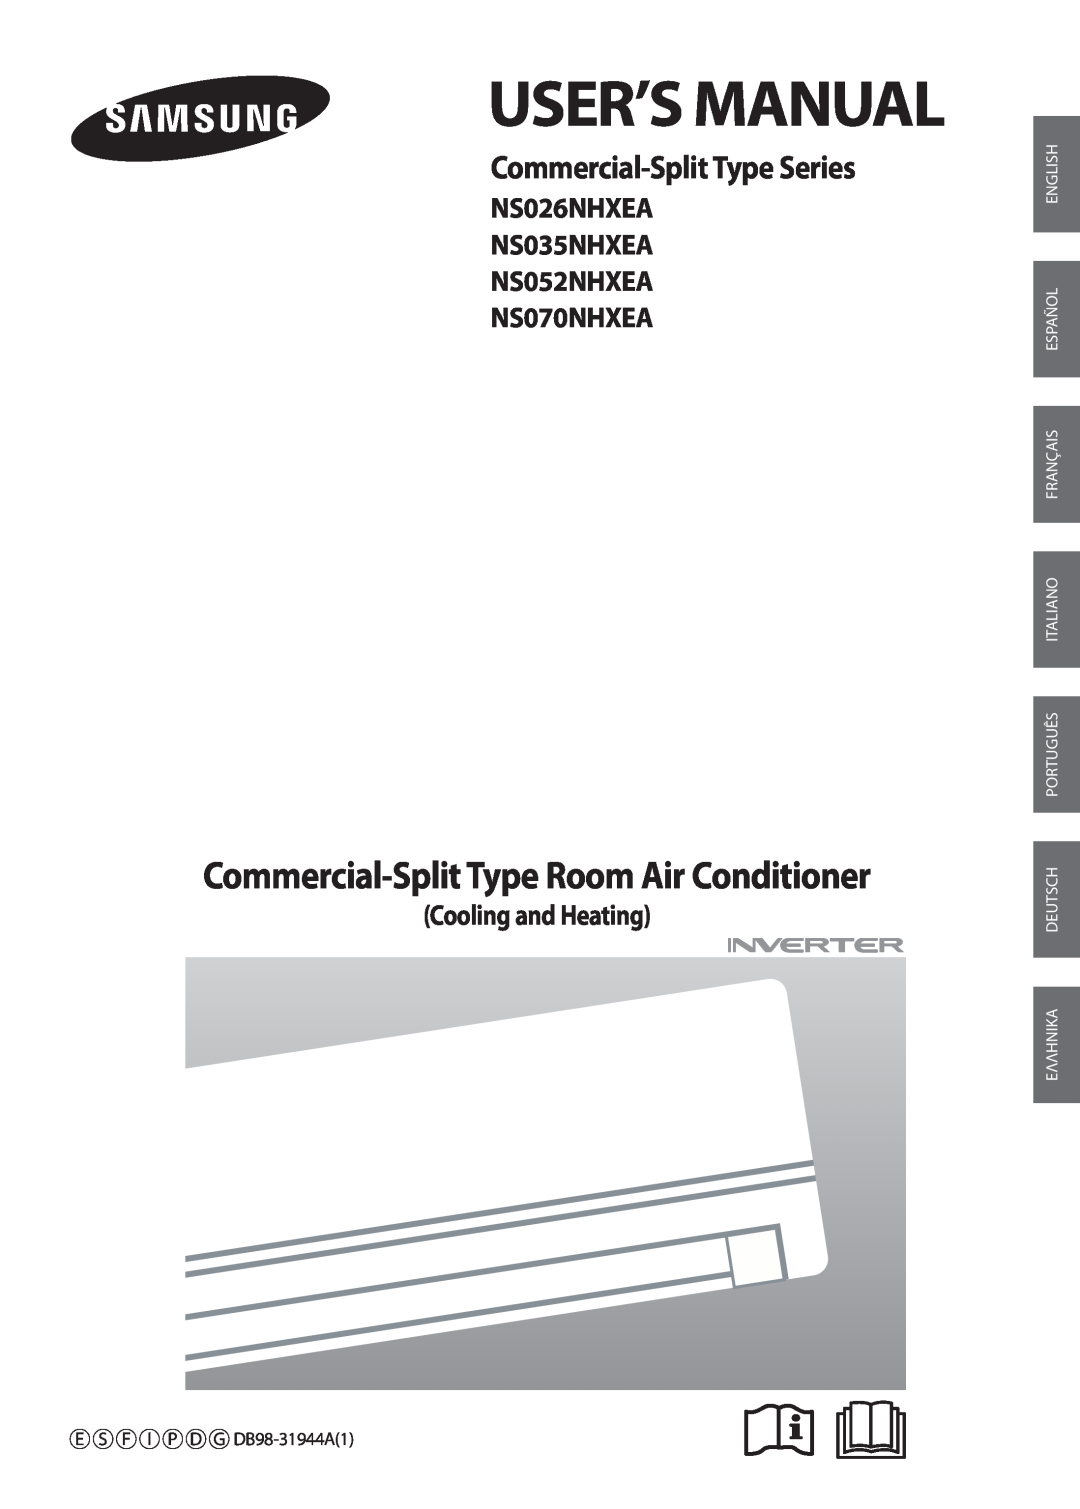 Samsung manual Commercial-SplitType Series, NS026NHXEA NS035NHXEA NS052NHXEA NS070NHXEA, Cooling and Heating, English 